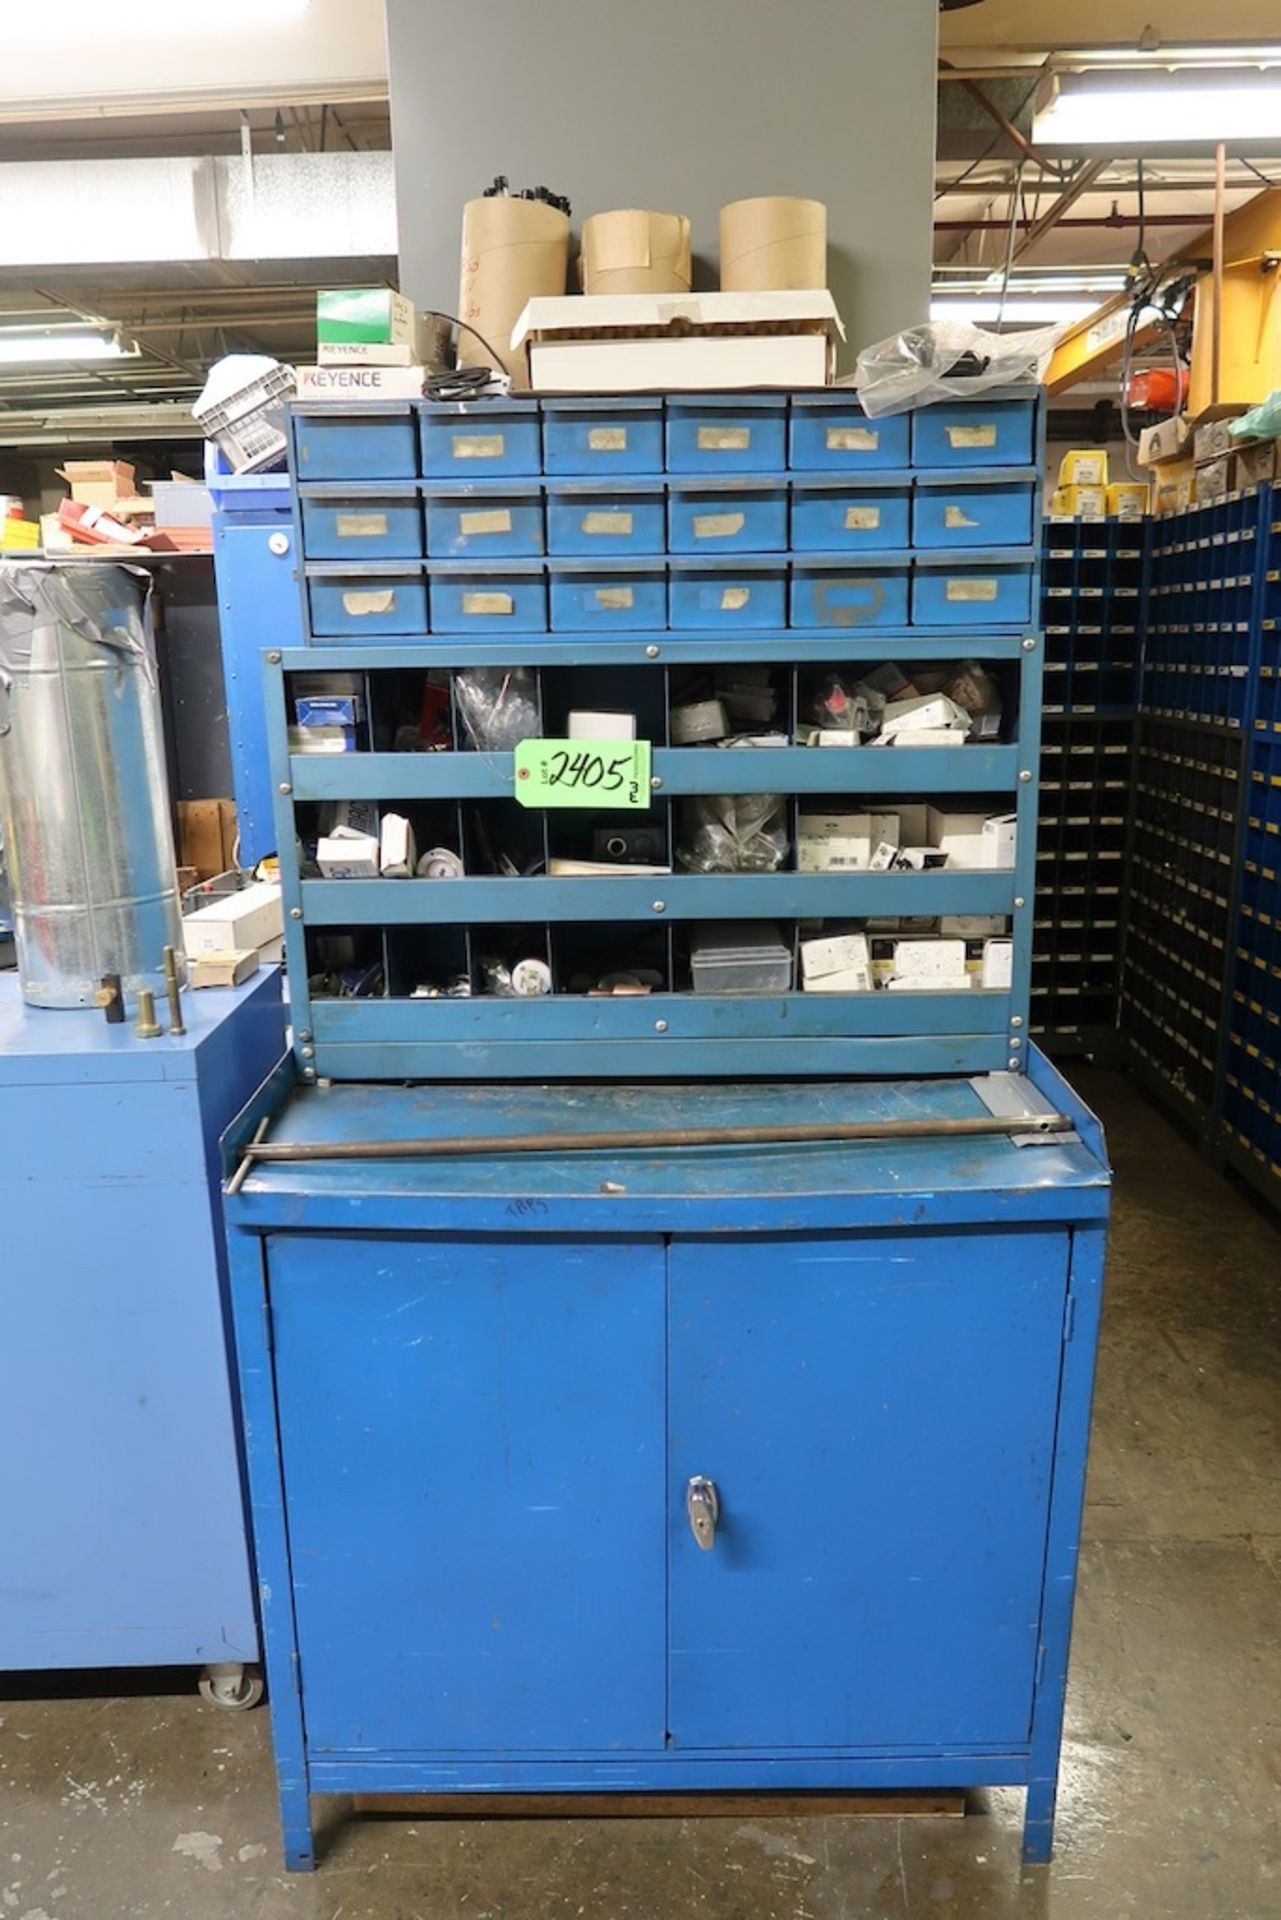 Workbench, Table, 2-Door Cabinets, Parts Organizers and Carts with Misc. Contents - Image 10 of 11